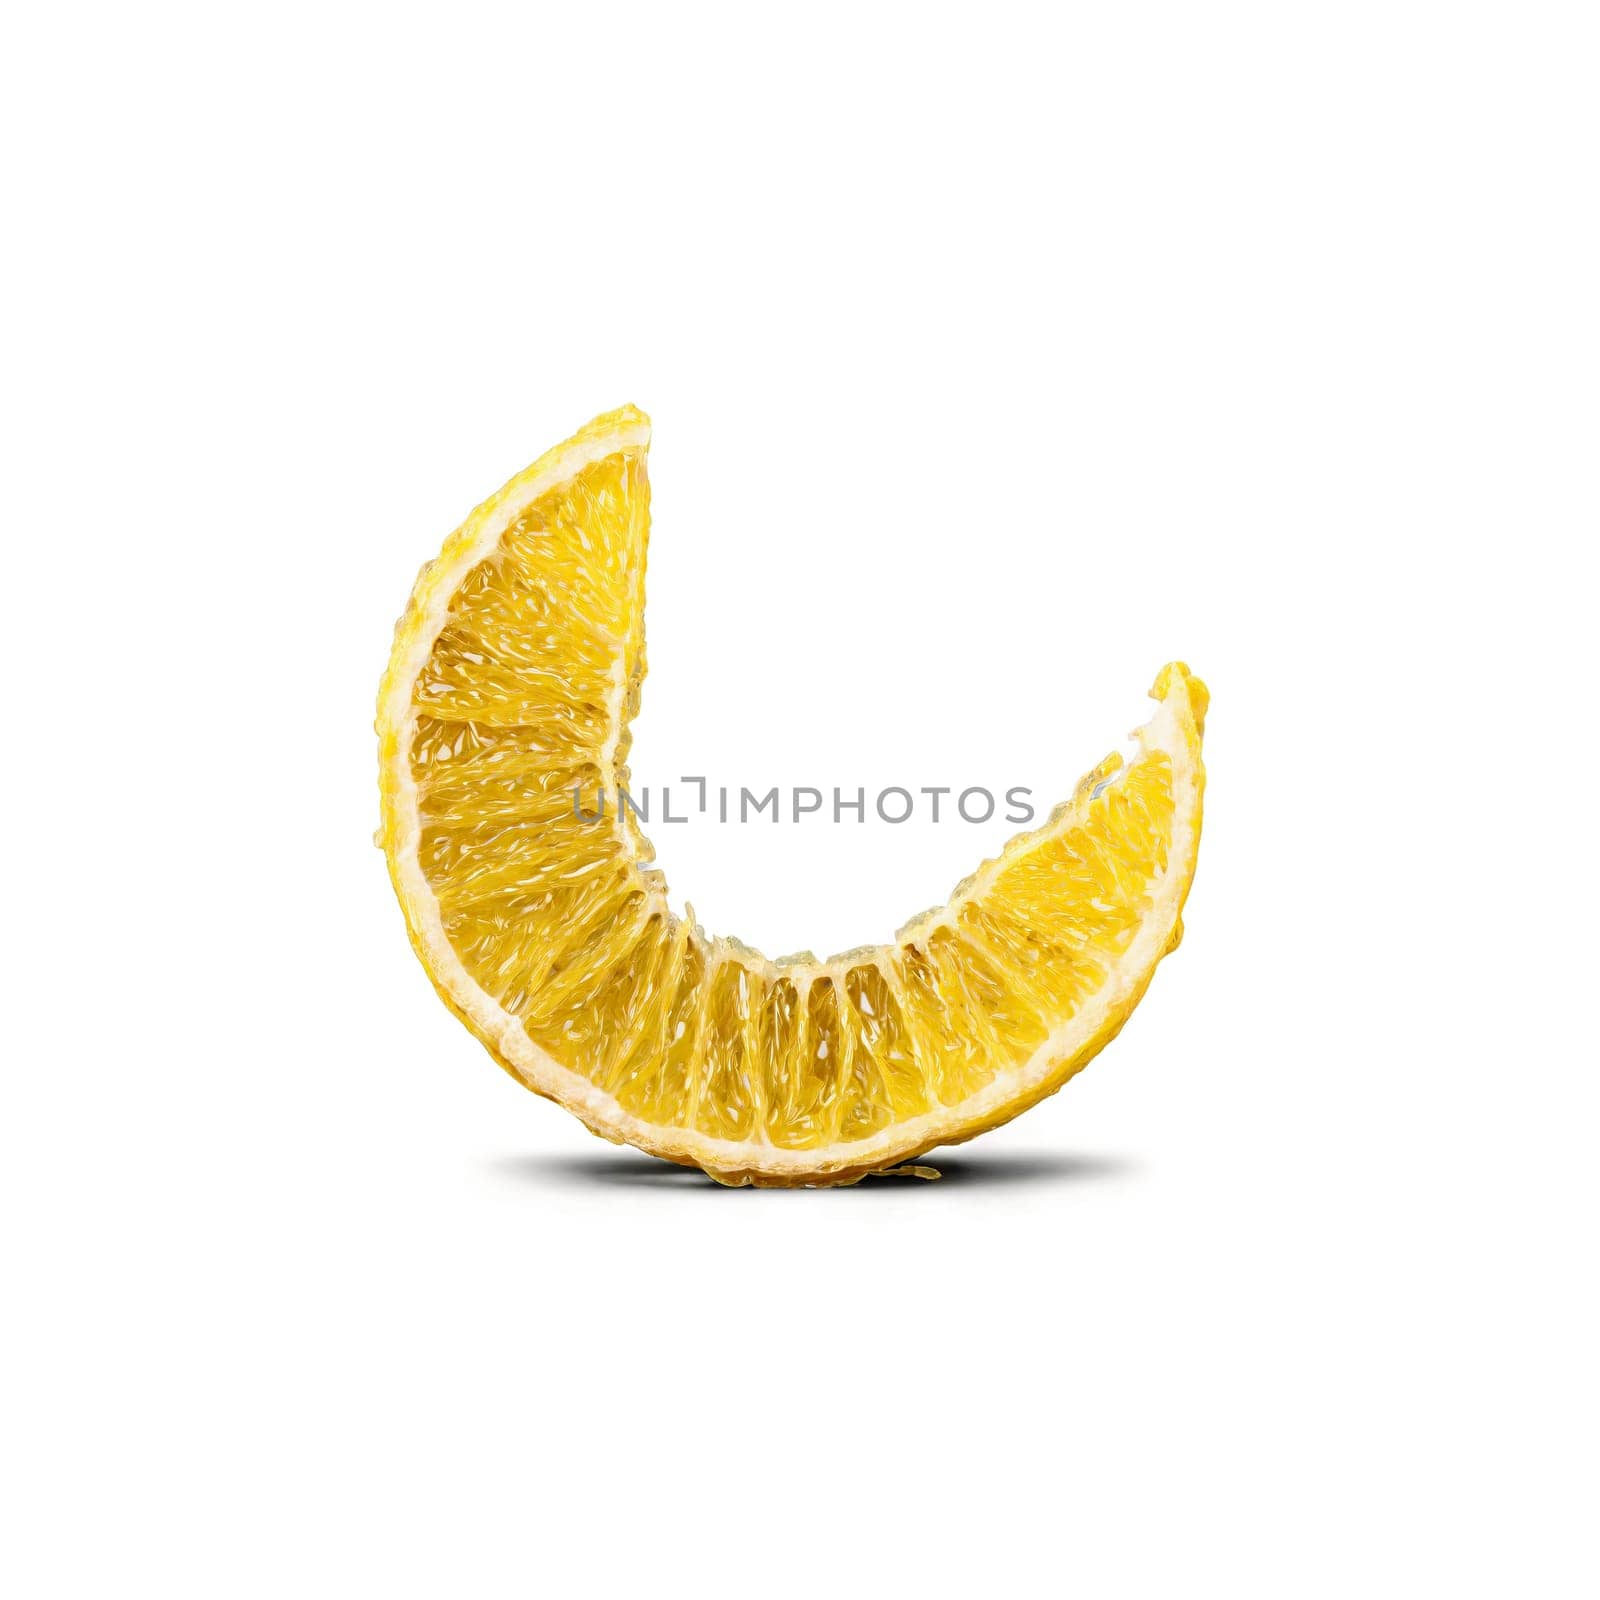 Dried lemon peel yellow color textured surface curved strips Food and culinary concept. Food isolated on transparent background.